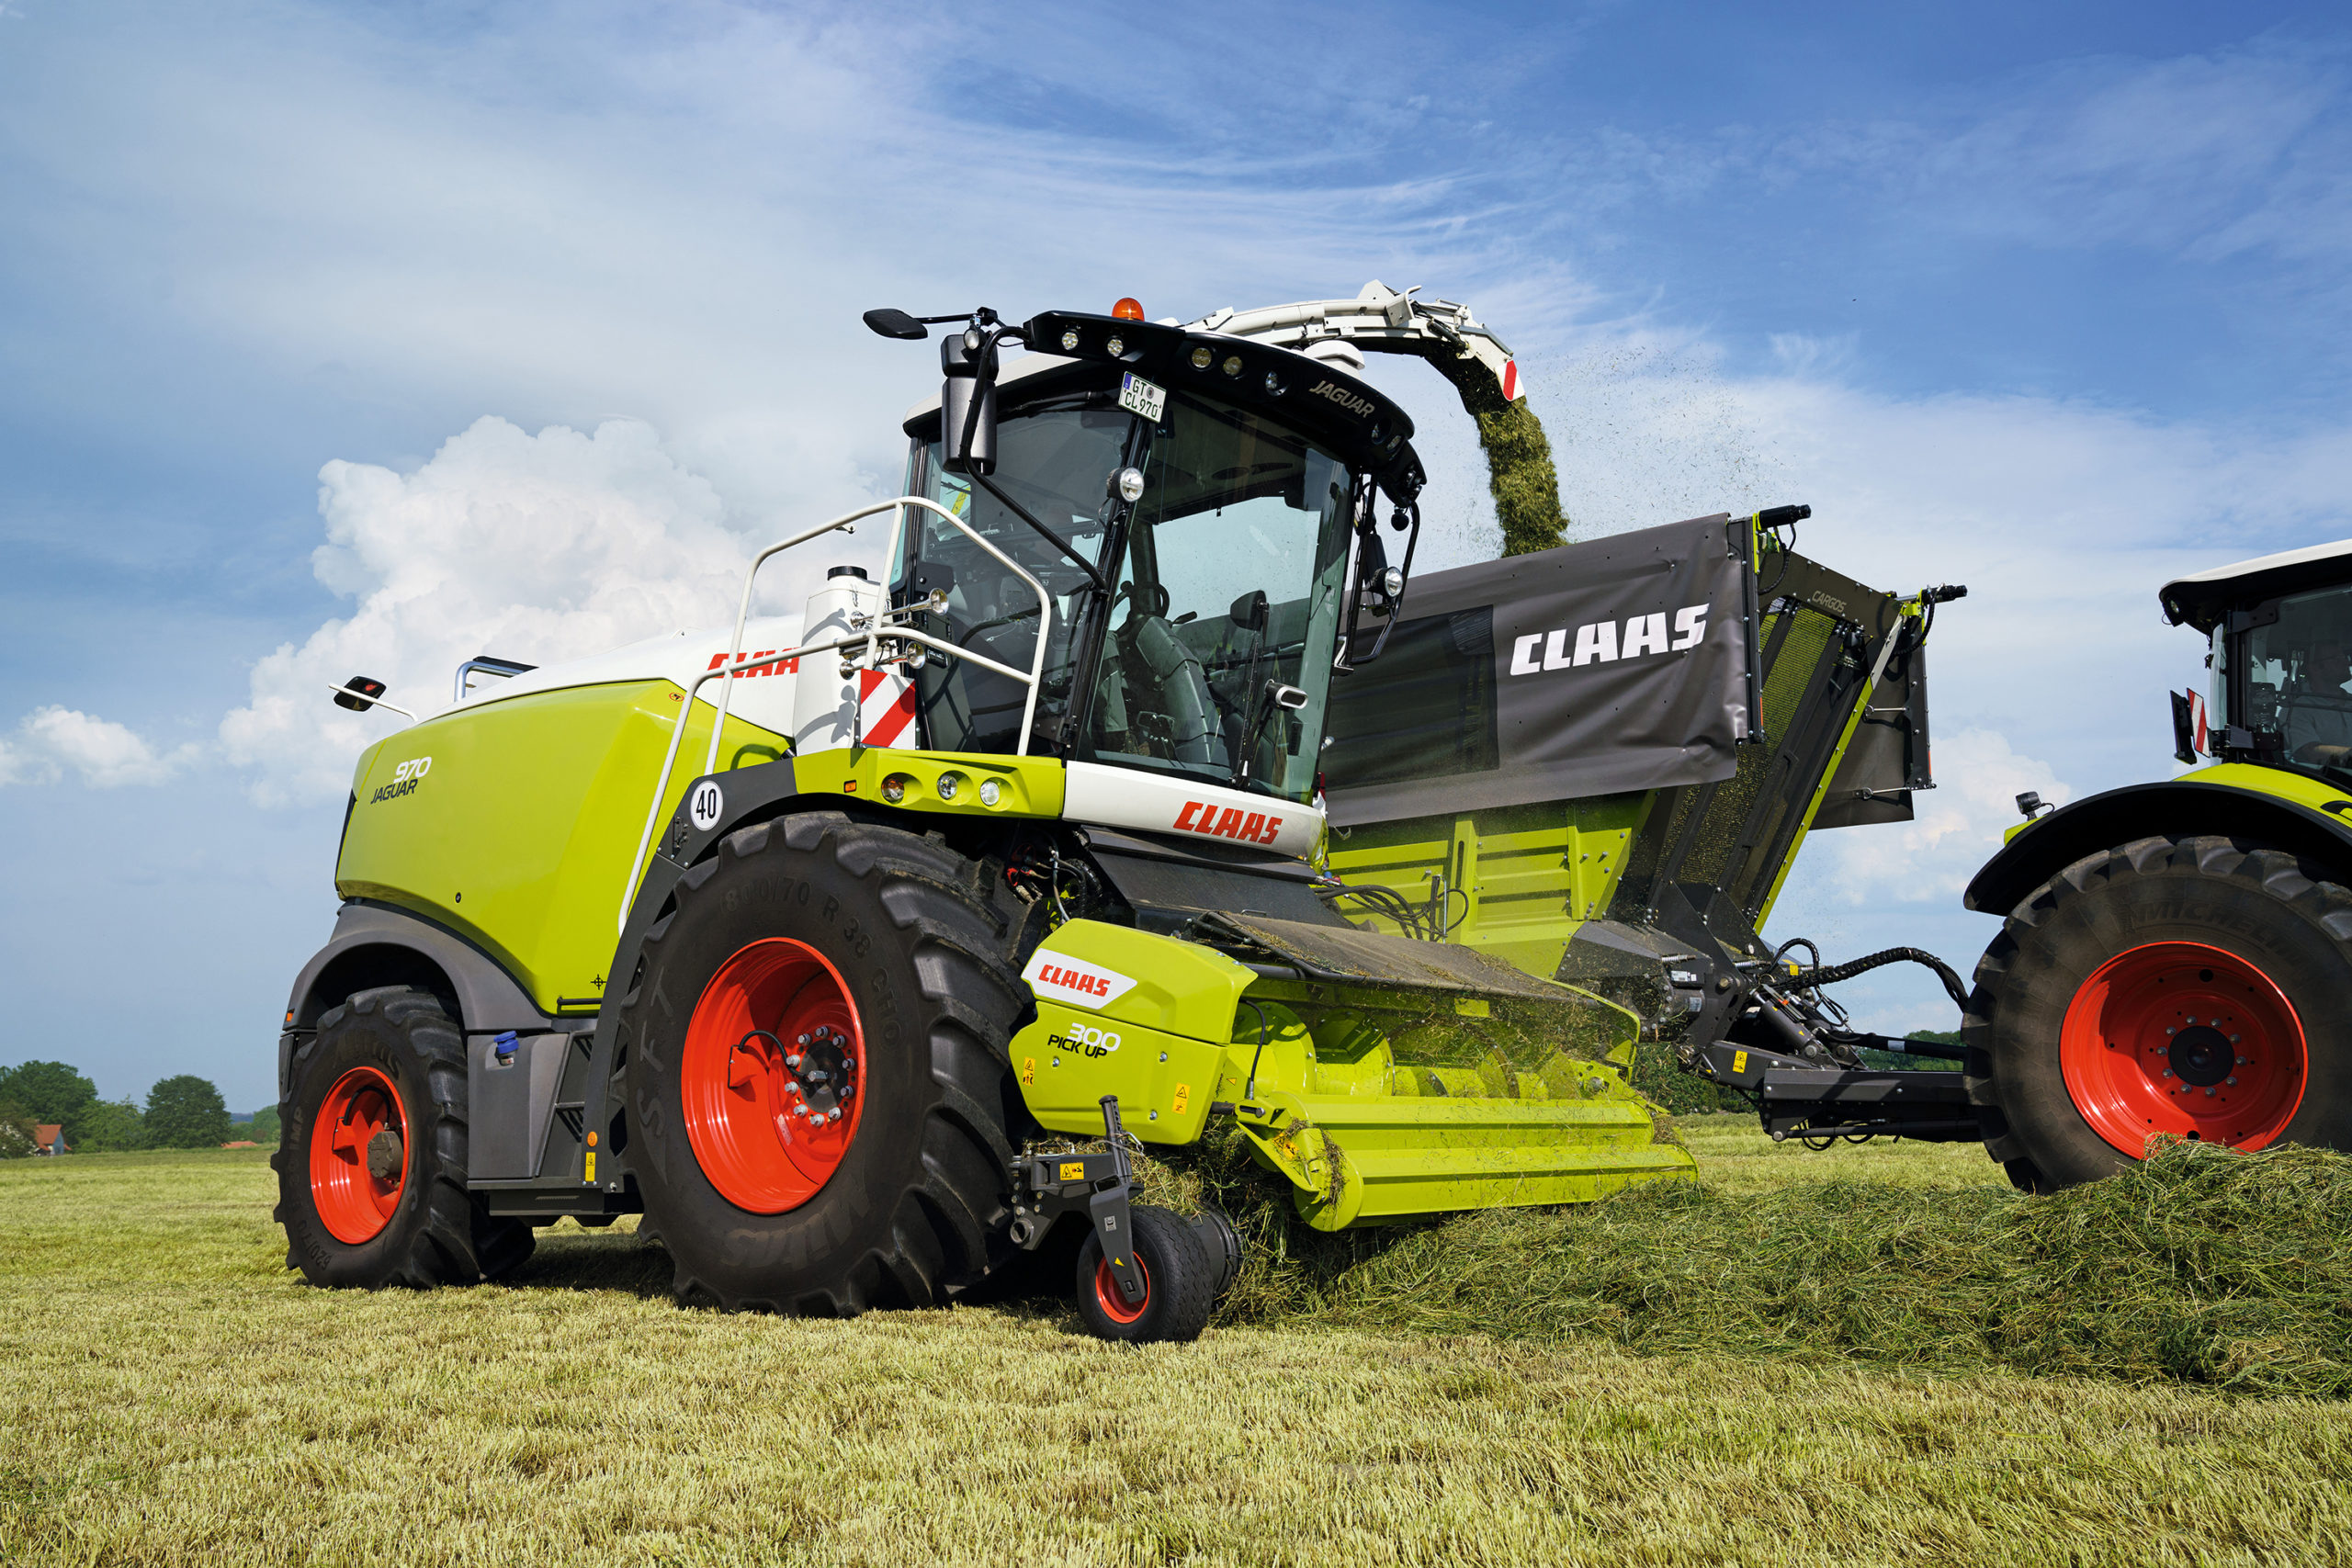 New equipment features for CLAAS JAGUAR 900 forage harvesters